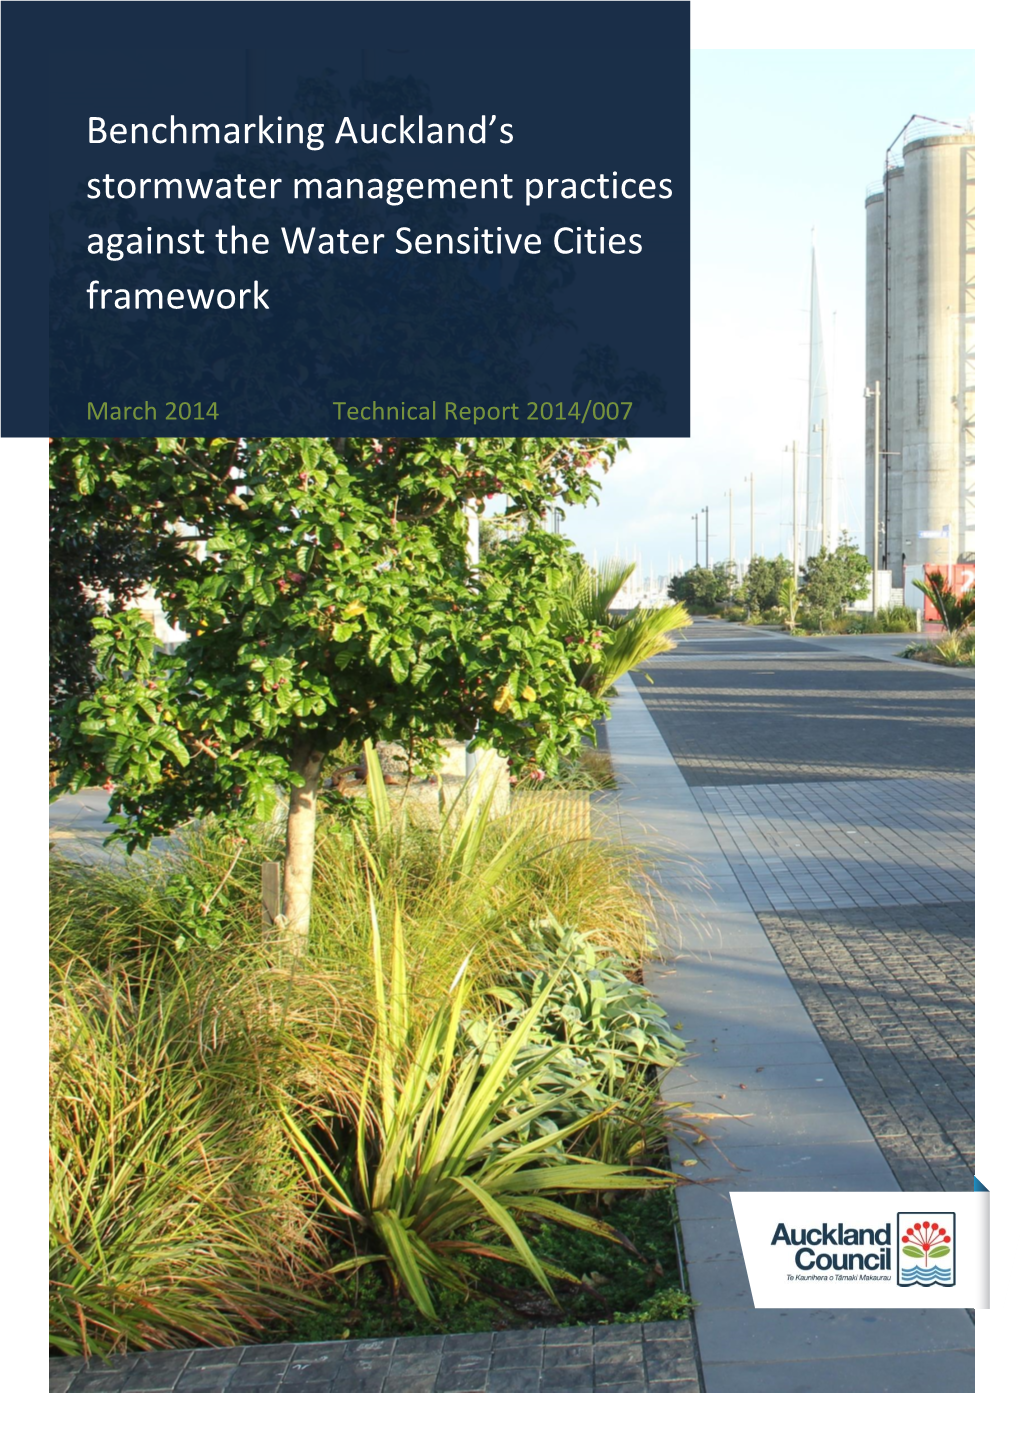 Benchmarking Auckland's Stormwater Management Practices Against The